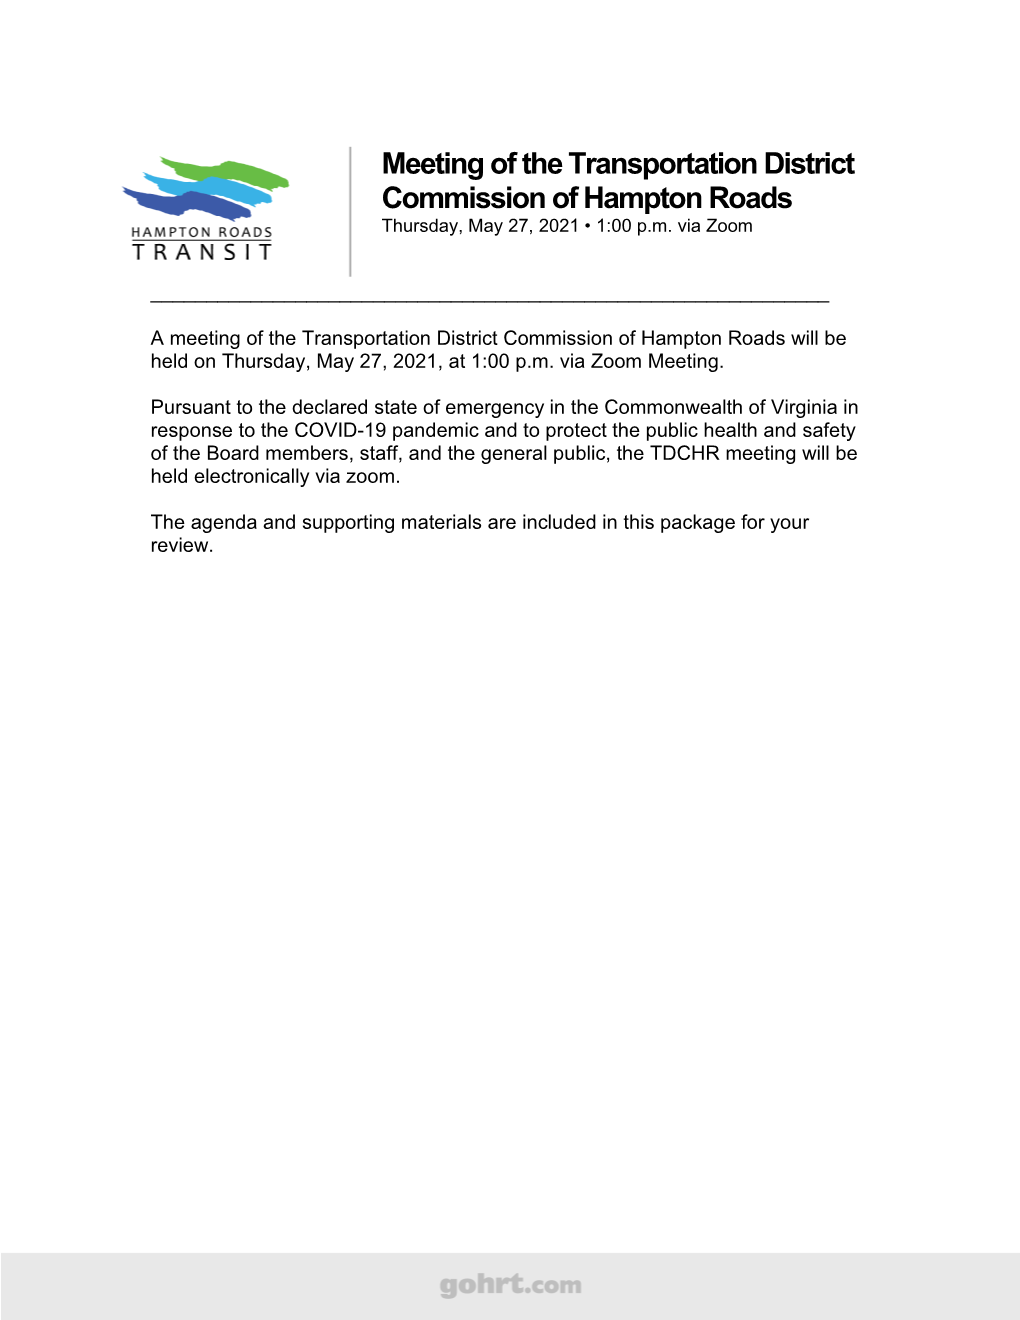 Meeting of the Transportation District Commission of Hampton Roads Thursday, May 27, 2021 • 1:00 P.M